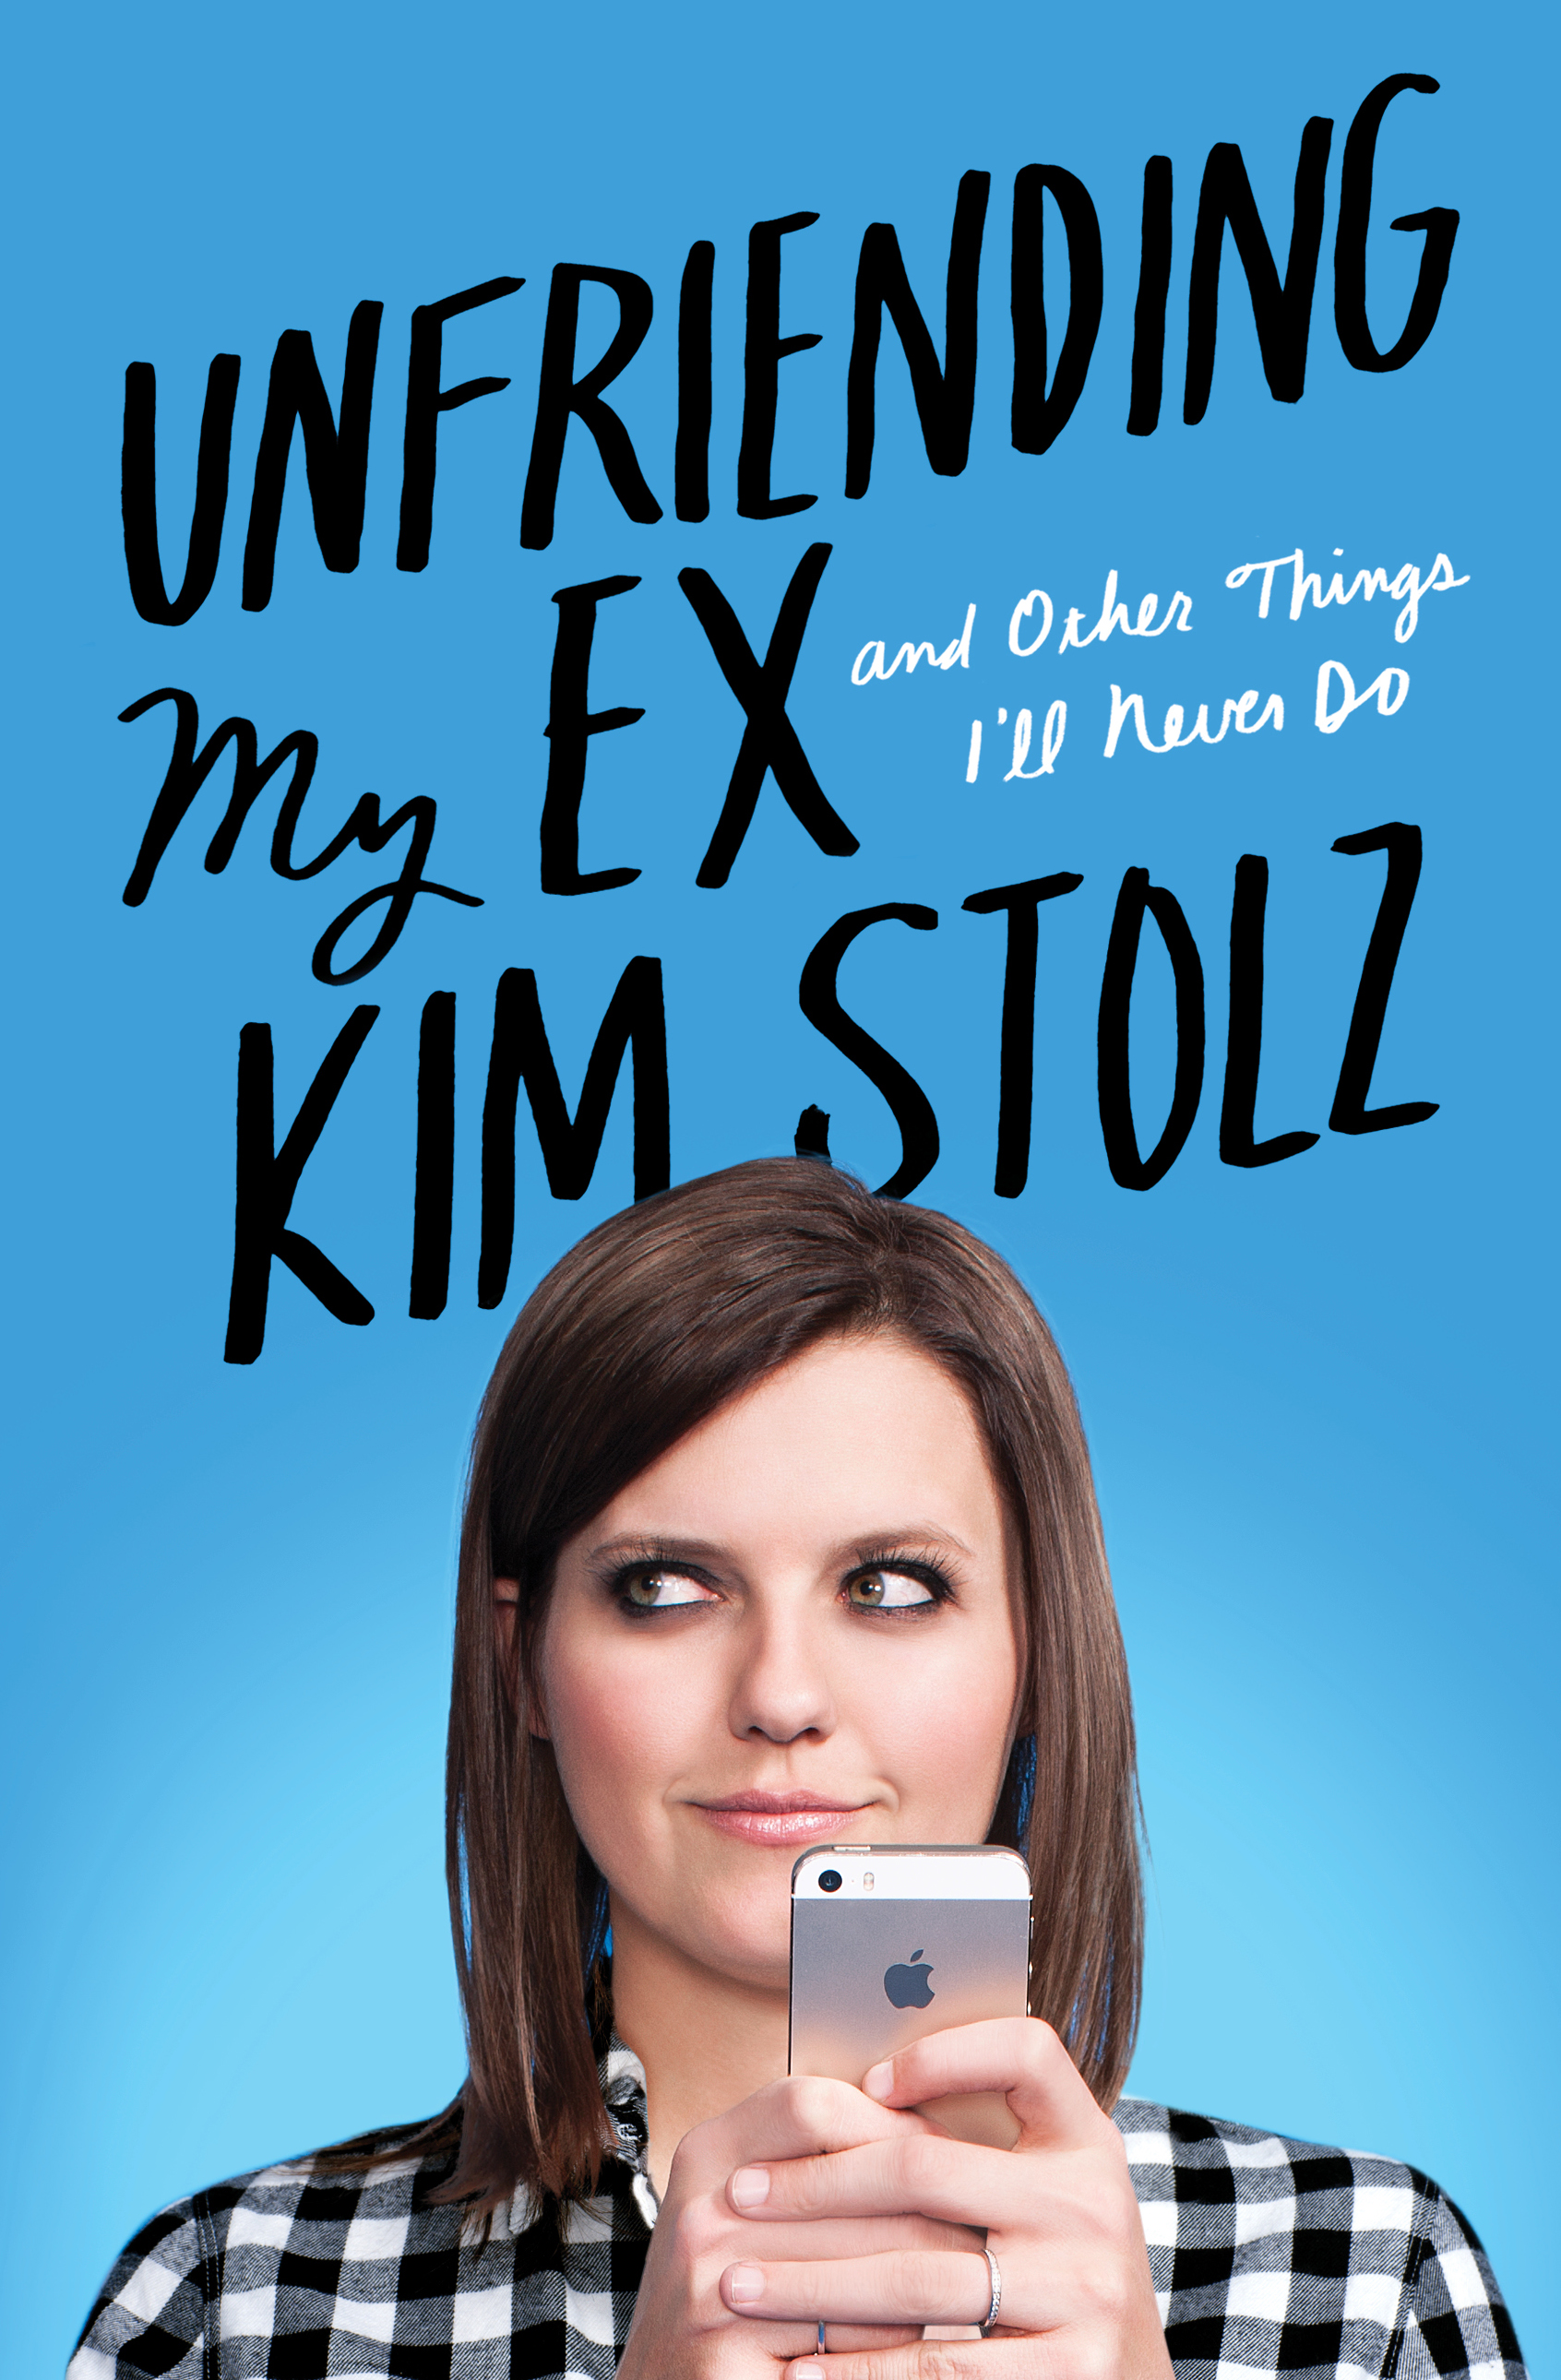 <i>Unfriending My Ex (And Other Things I'll Never Do)</i> by Kim Stolz (Scribner)